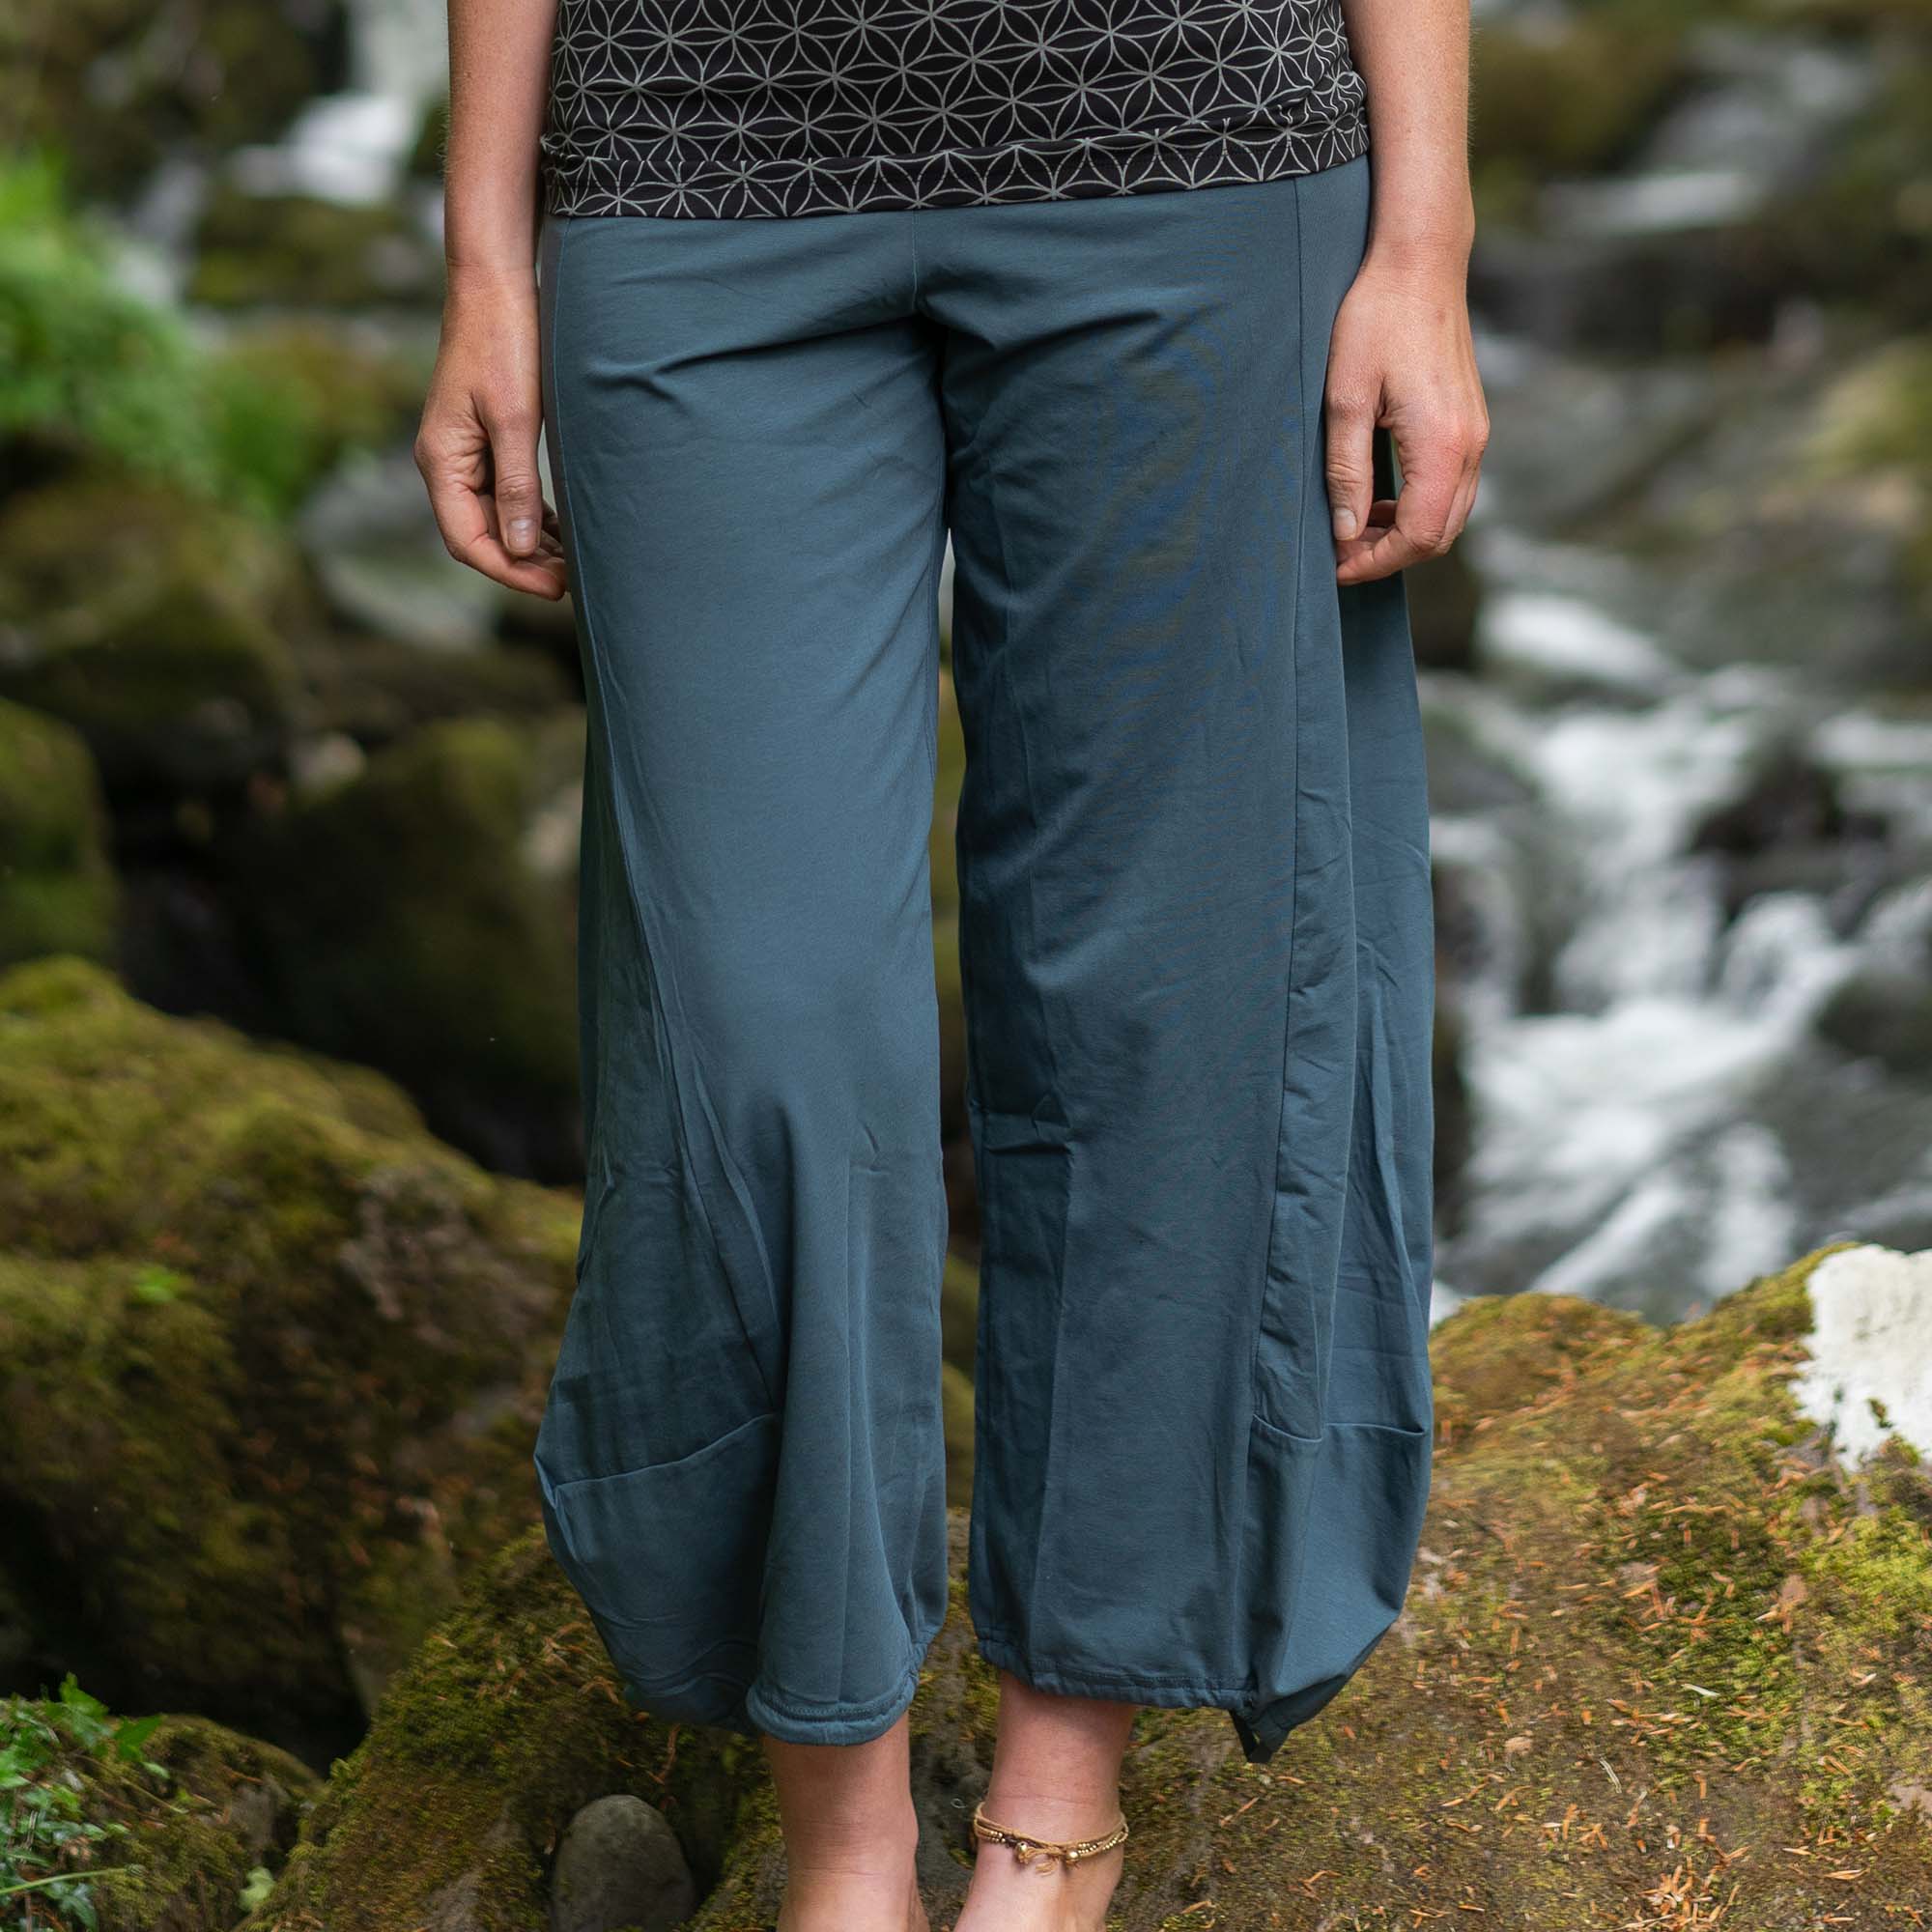 Women's Organic Cotton Pants and Leggings, Sustainable and Ethically Made